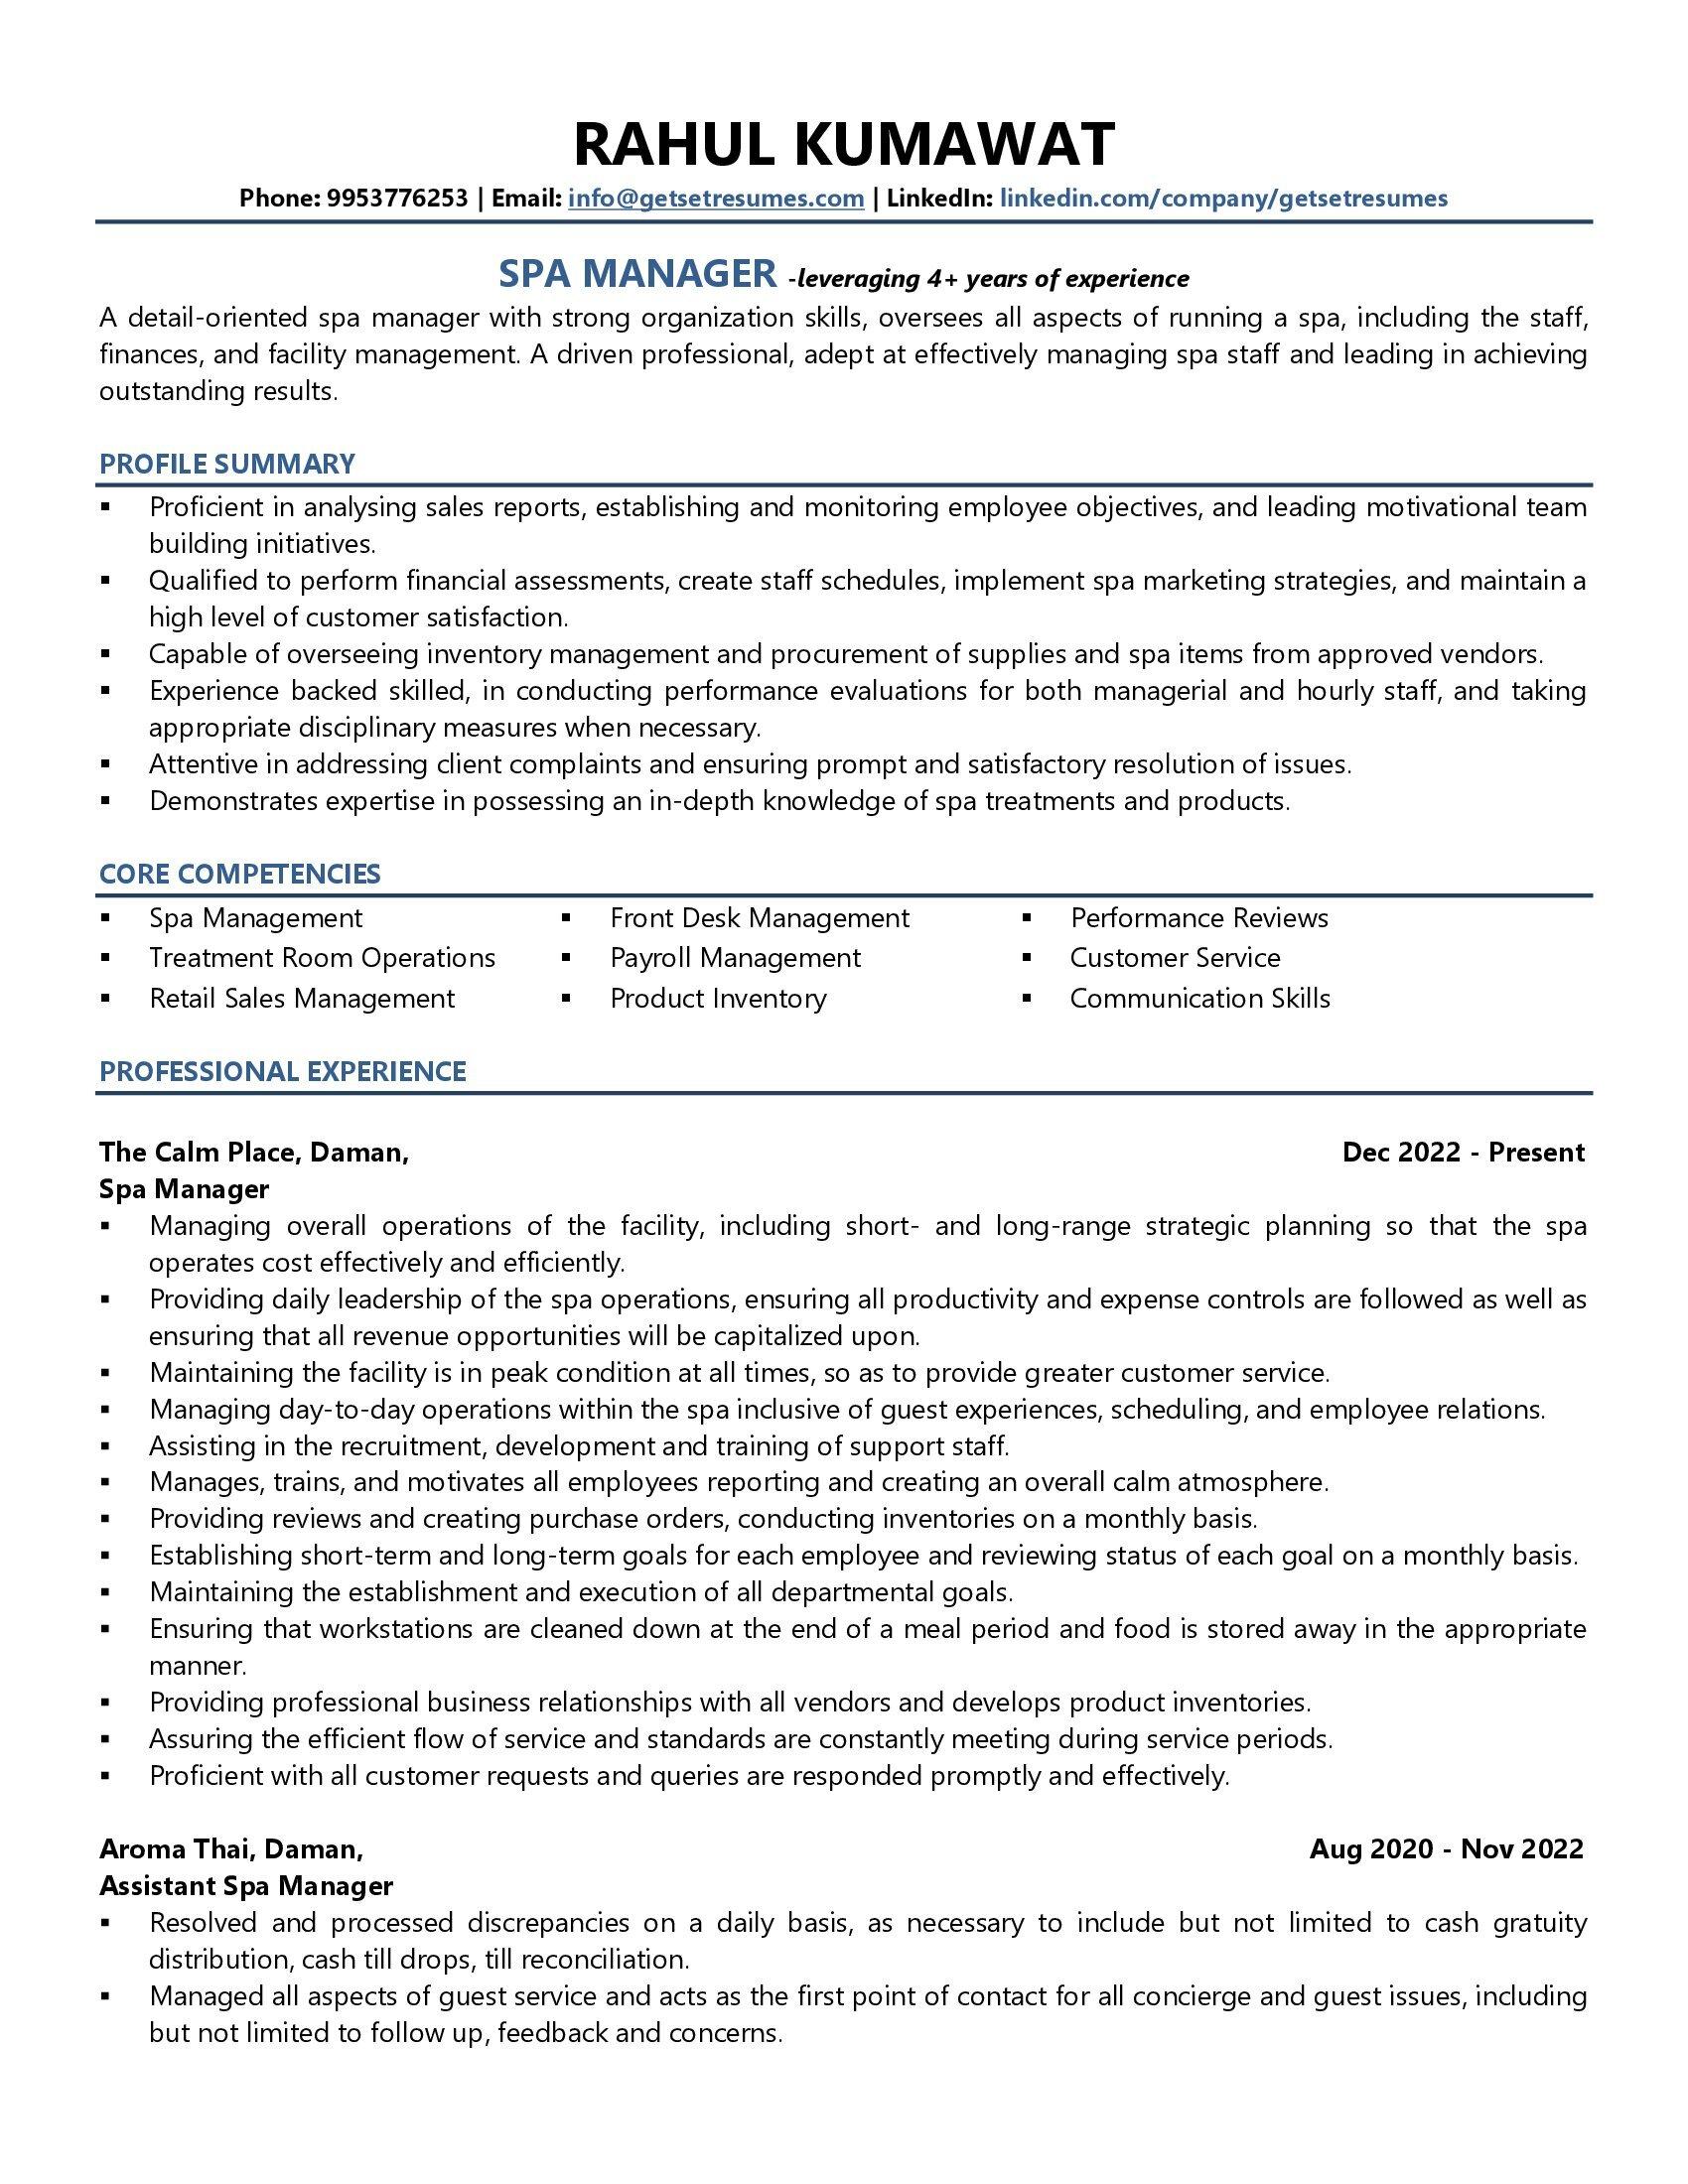 Spa Manager - Resume Example & Template